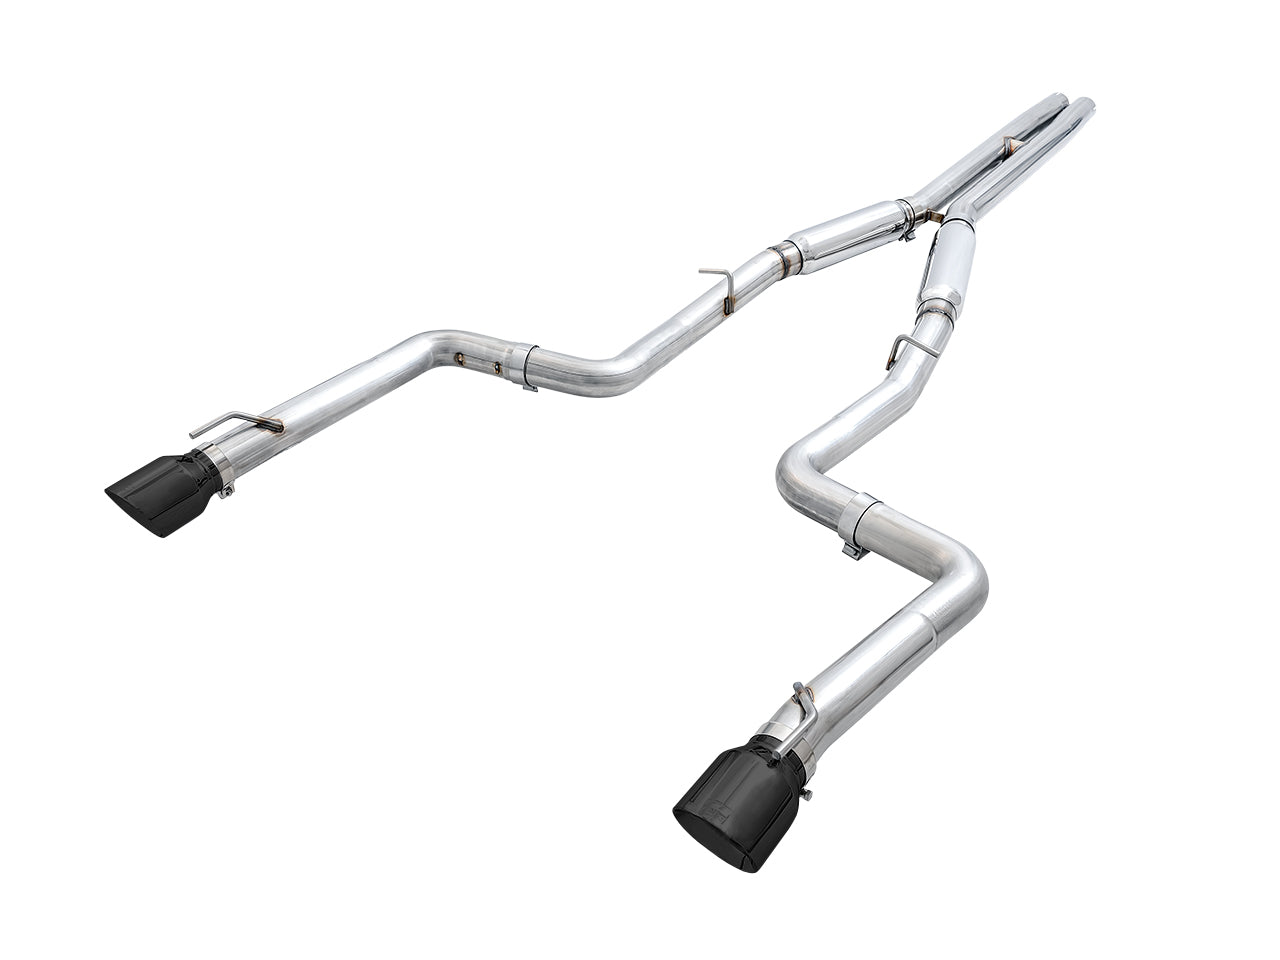 AWE Exhaust Suite for the 15+ Dodge Charger 6.4 / 6.2 SC